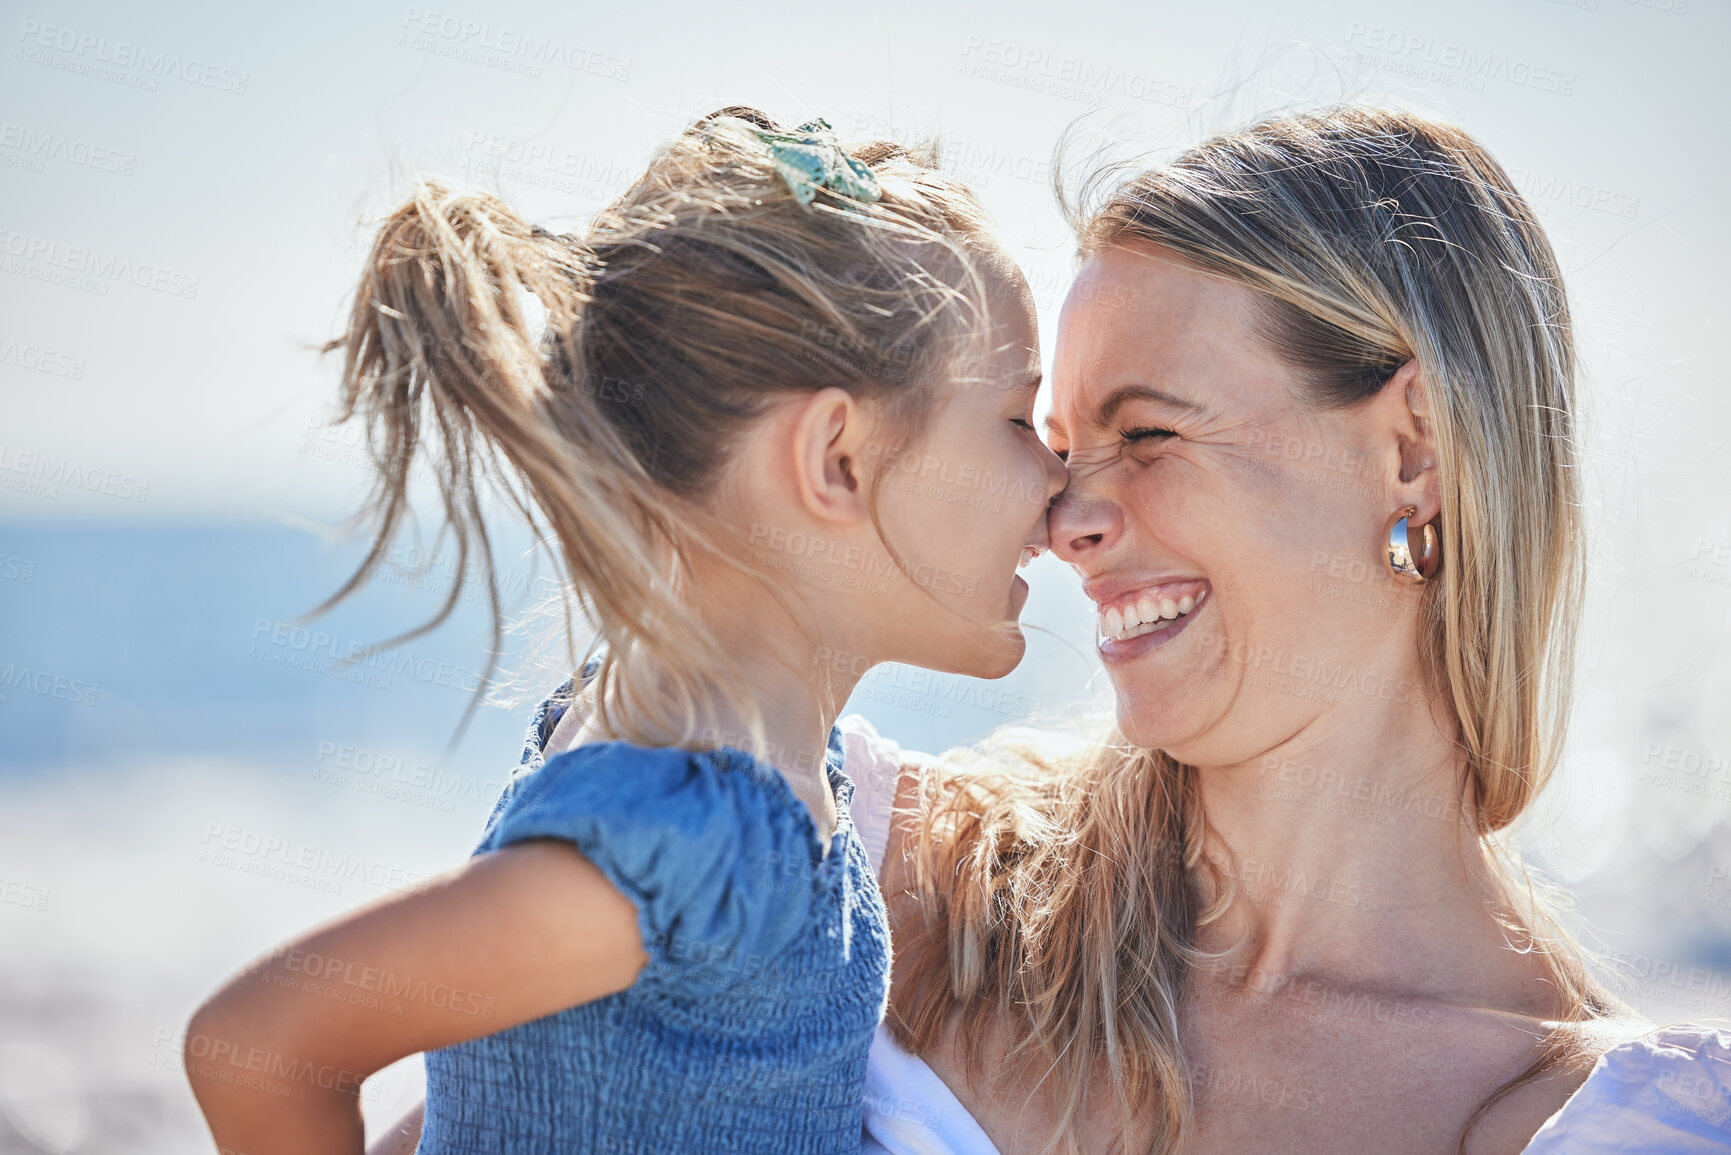 Buy stock photo Adorable little daughter and mother rubbing noses while spending time together at the beach while on vacation. Cheerful mom and little girl having fun outdoors on a sunny day